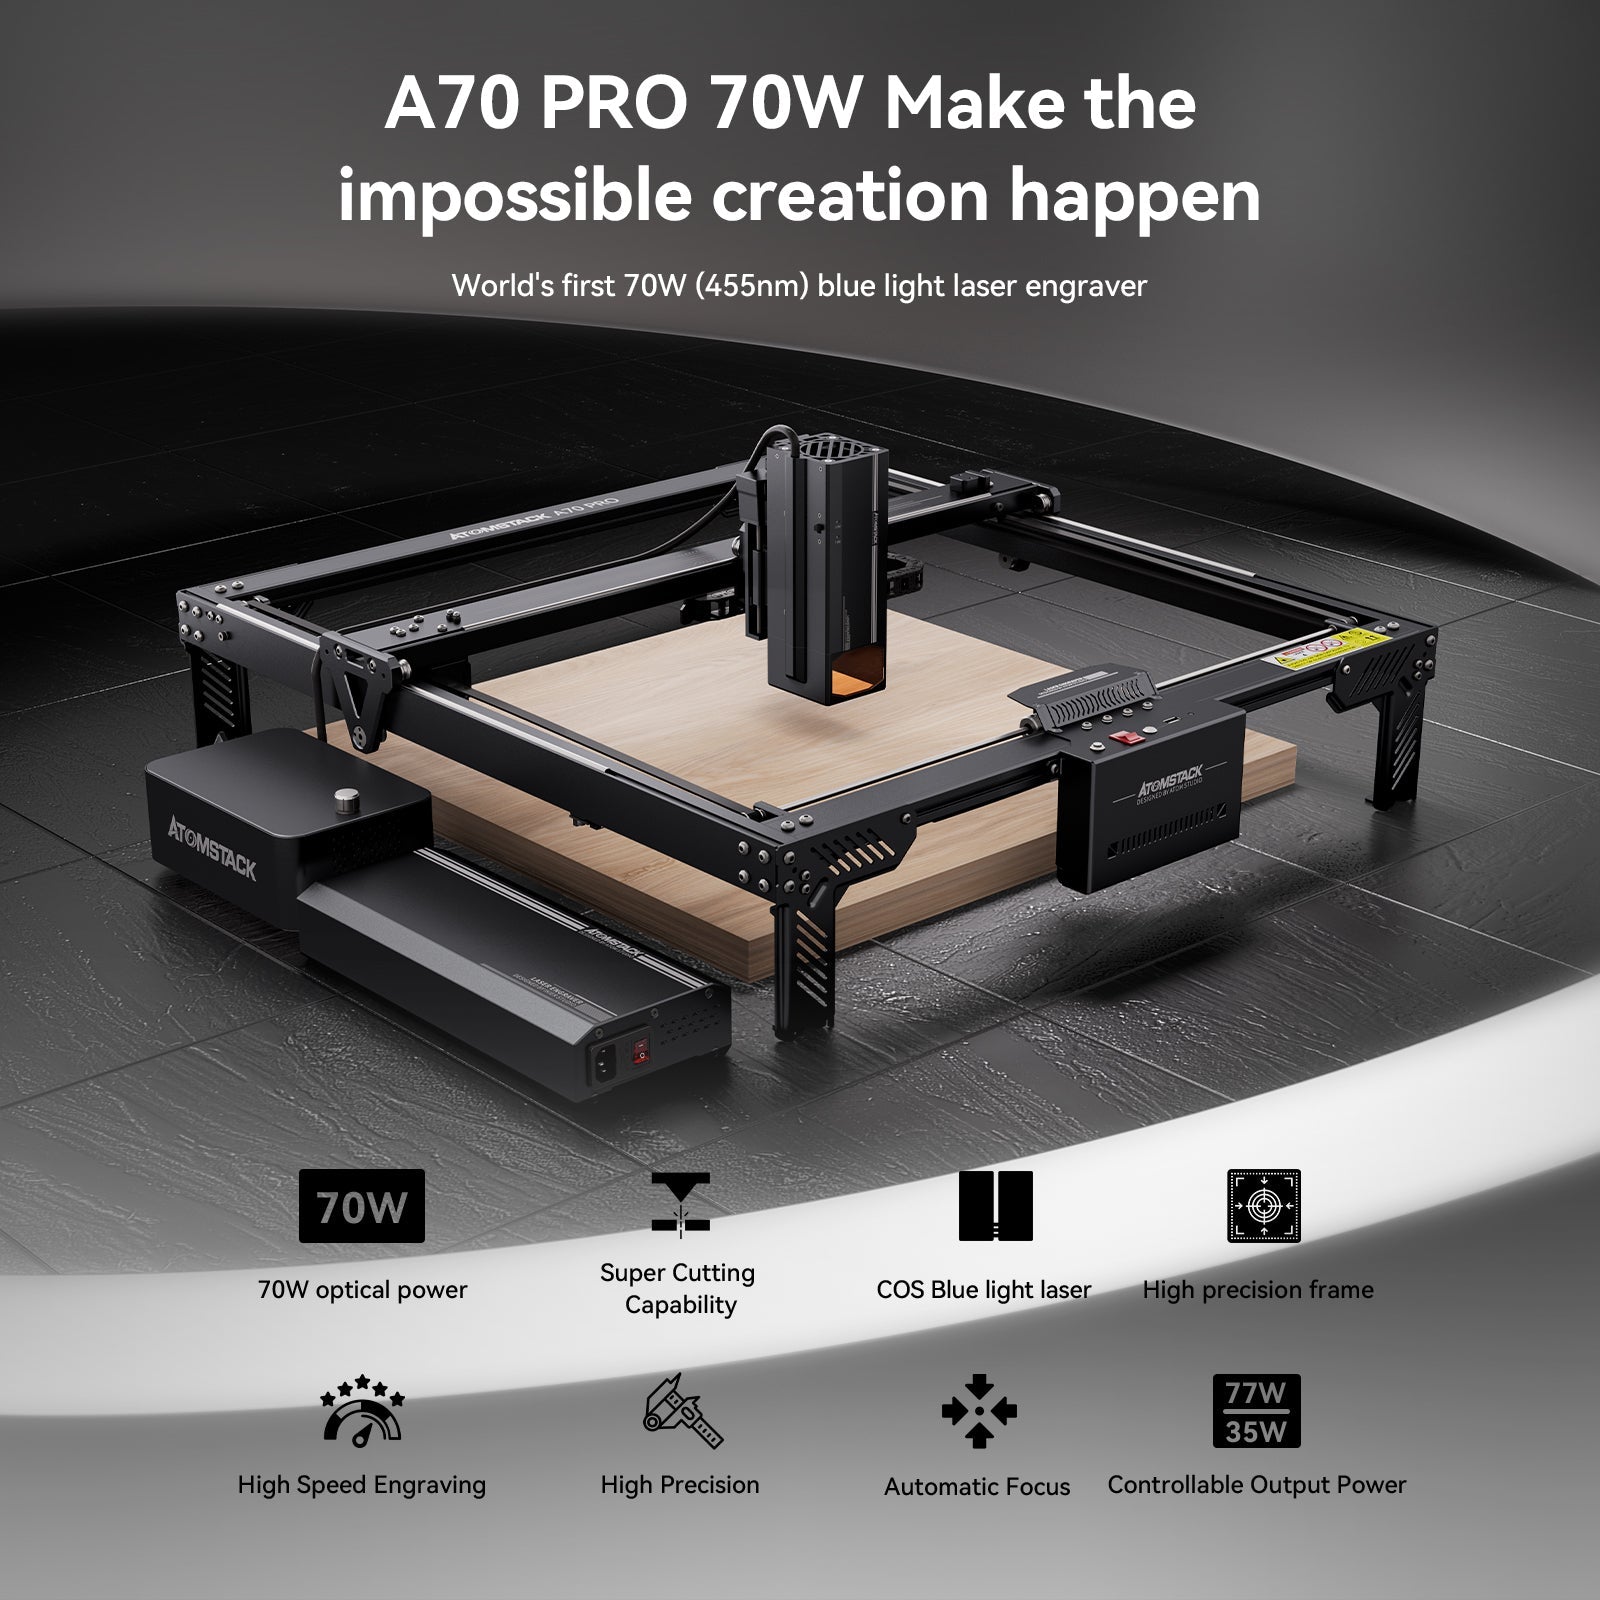 Atomstack A70 Pro X70 PRO 360W Autofocus Laser Engraving Cutter With 60 L/min Air Support 35 W Engraving 70 W Cutting Dual Mode 0.01 mm Precision Flame Alarm Intelligent Cooling CNC Laser Engraver For Wood, Metal,Plastic, Acrylic, Leather, Rubber